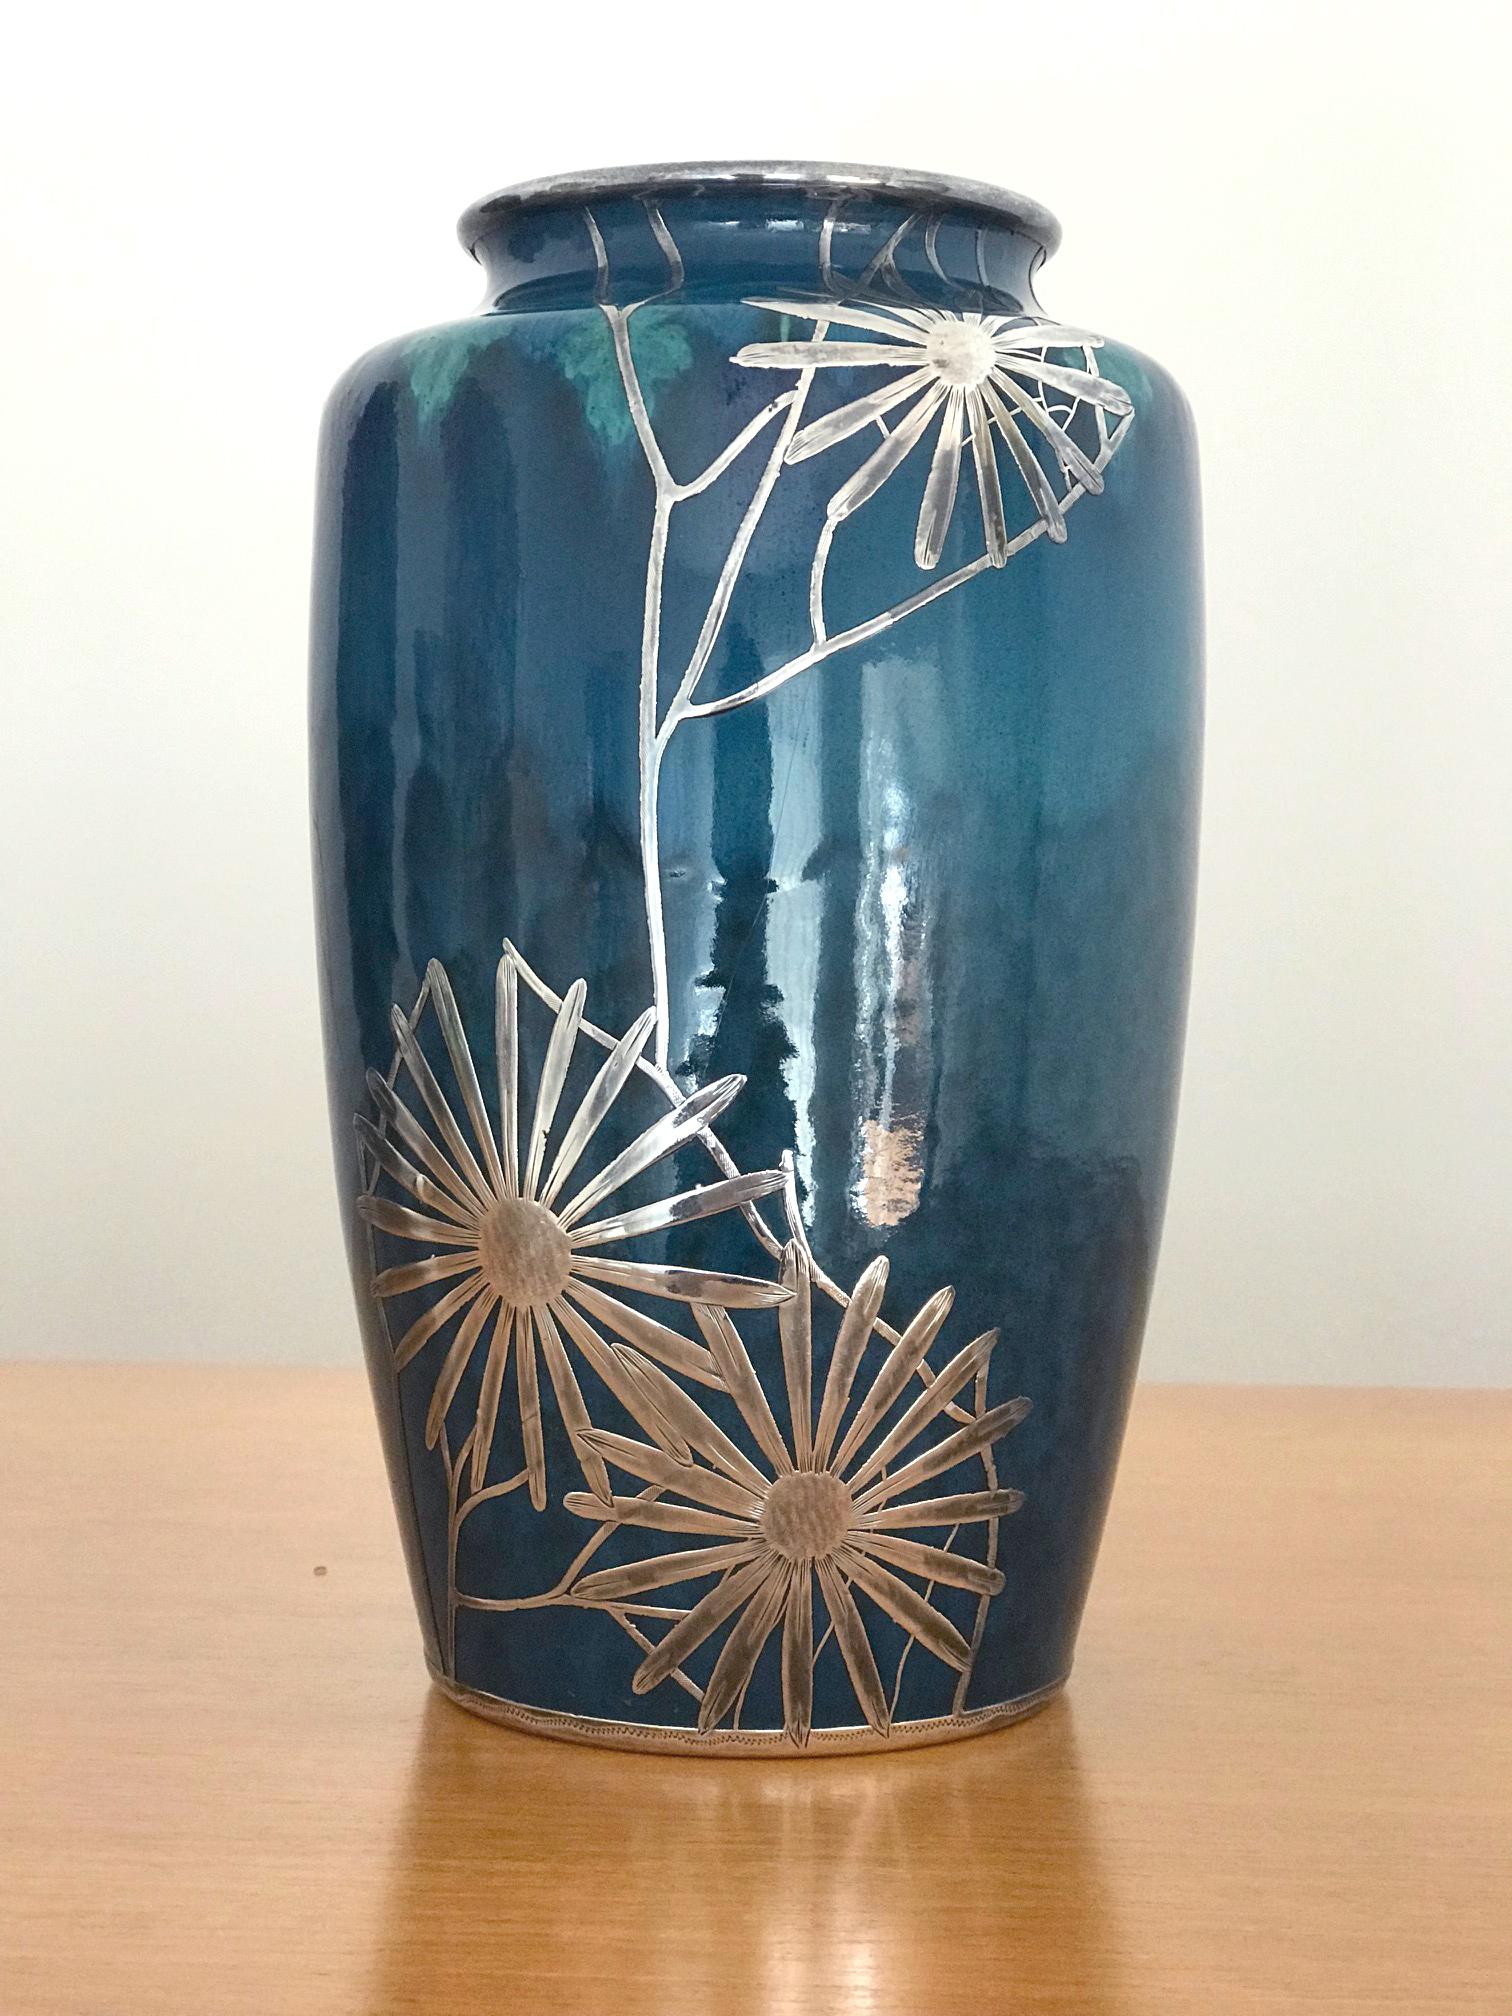 On offer here is a vase of blue glaze with silver overlay circa 1910s in the Art Nouveau style. The peacock blue stoneware vase was made by Ruskin Pottery (1898-1935) in England and is decorated with a subtle turquoise 